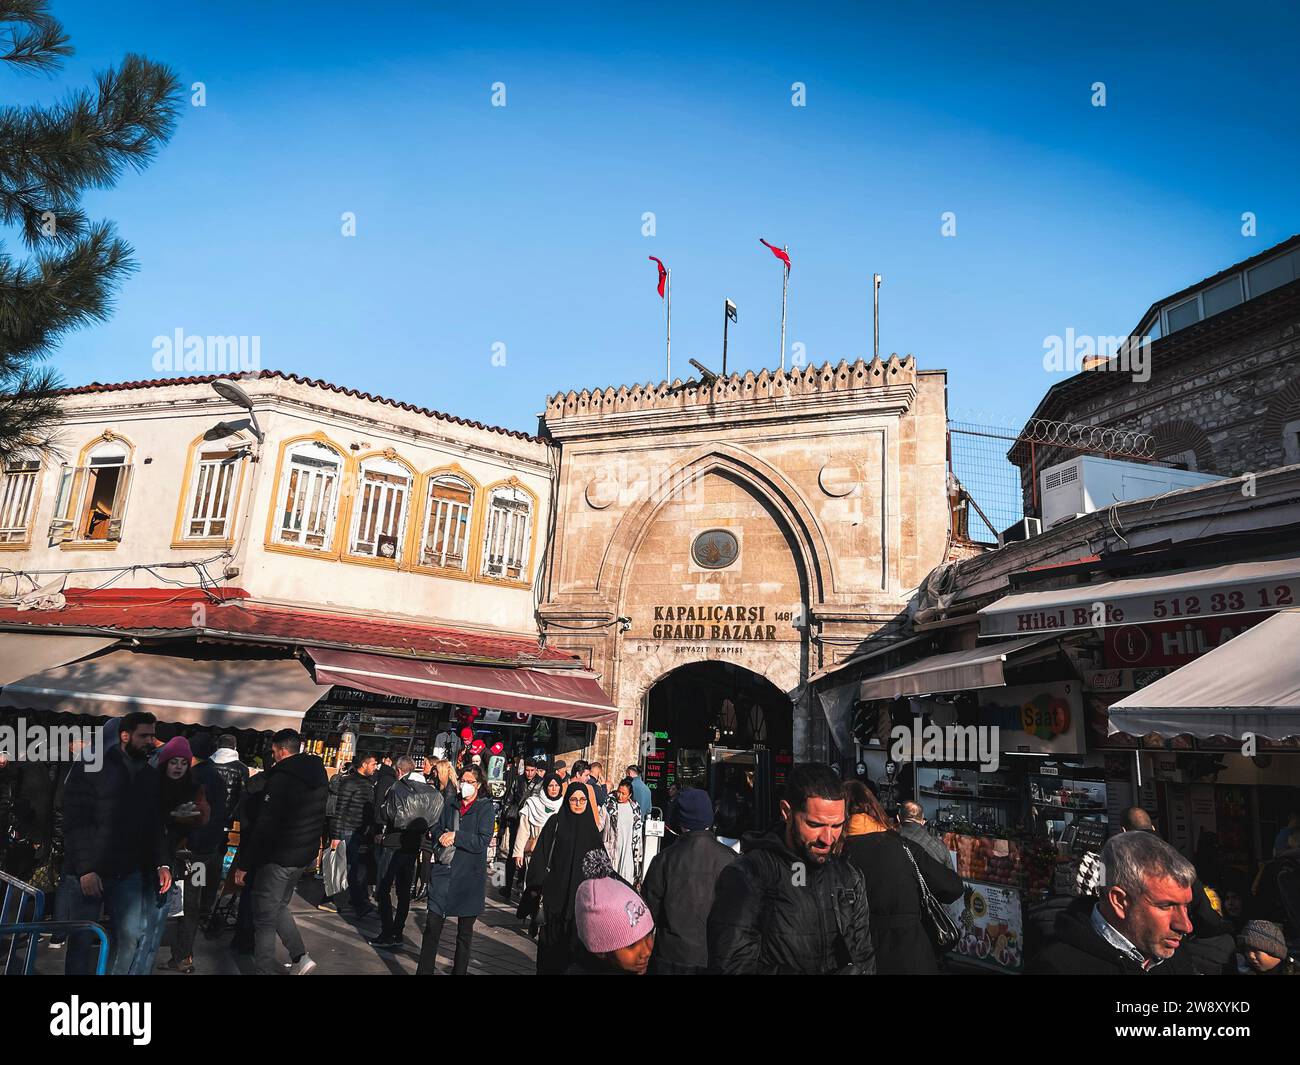 Istanbul, Turkiye - March 7, 2023: The Beyazit Gate of the Grand Bazaar, the oldest and largest shopping complex in the world, built in 1481. Stock Photo